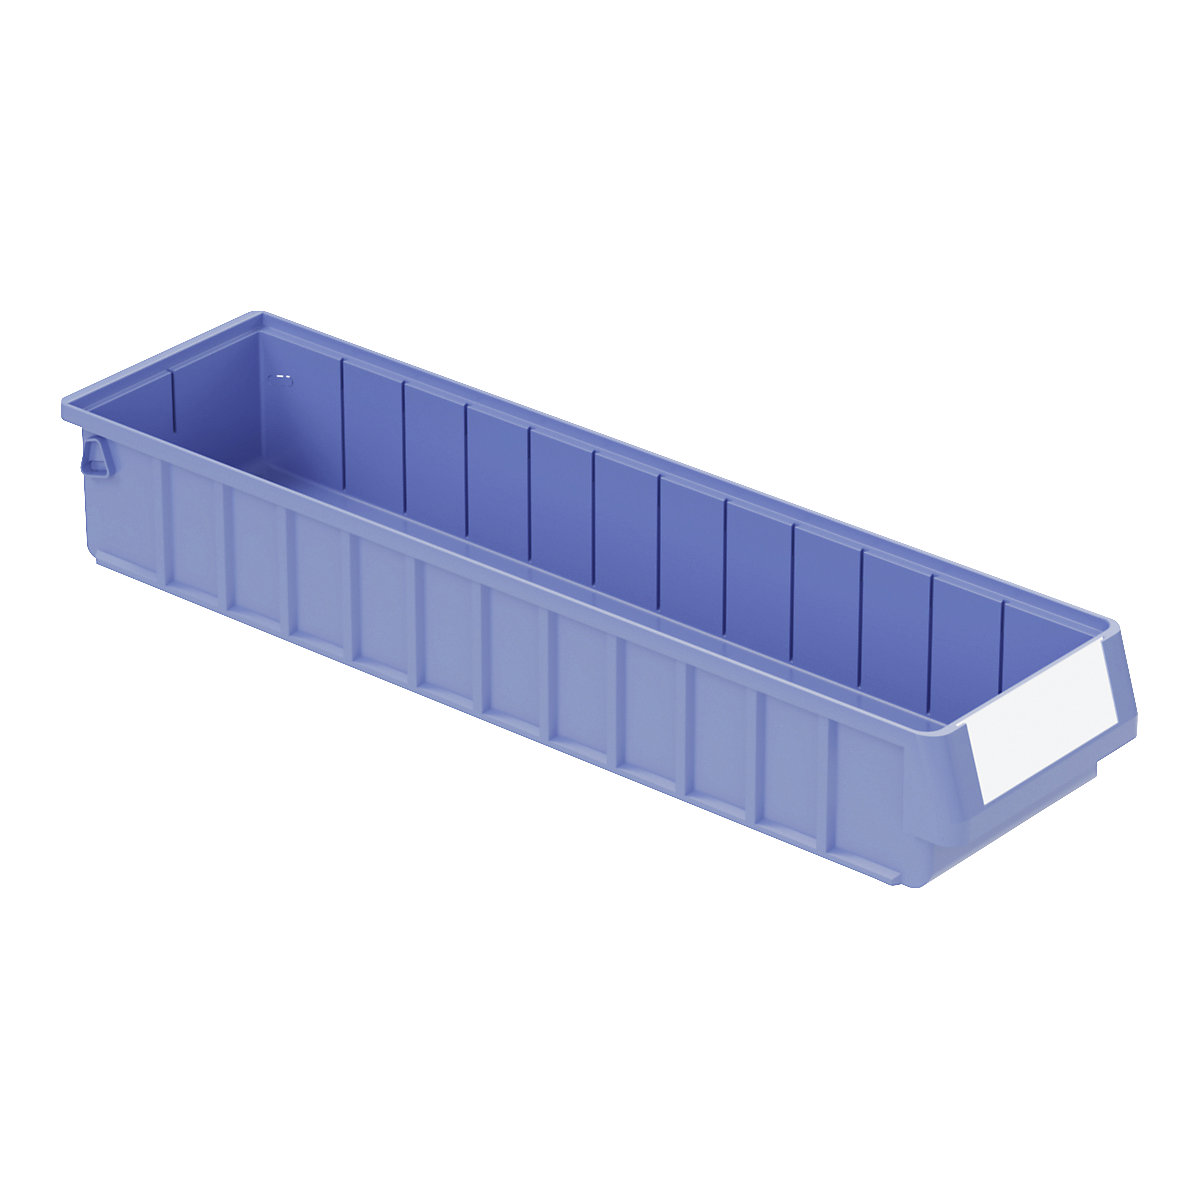 Shelf bin – BITO, made of PP, LxWxH 600 x 156 x 90 mm, pack of 12-1